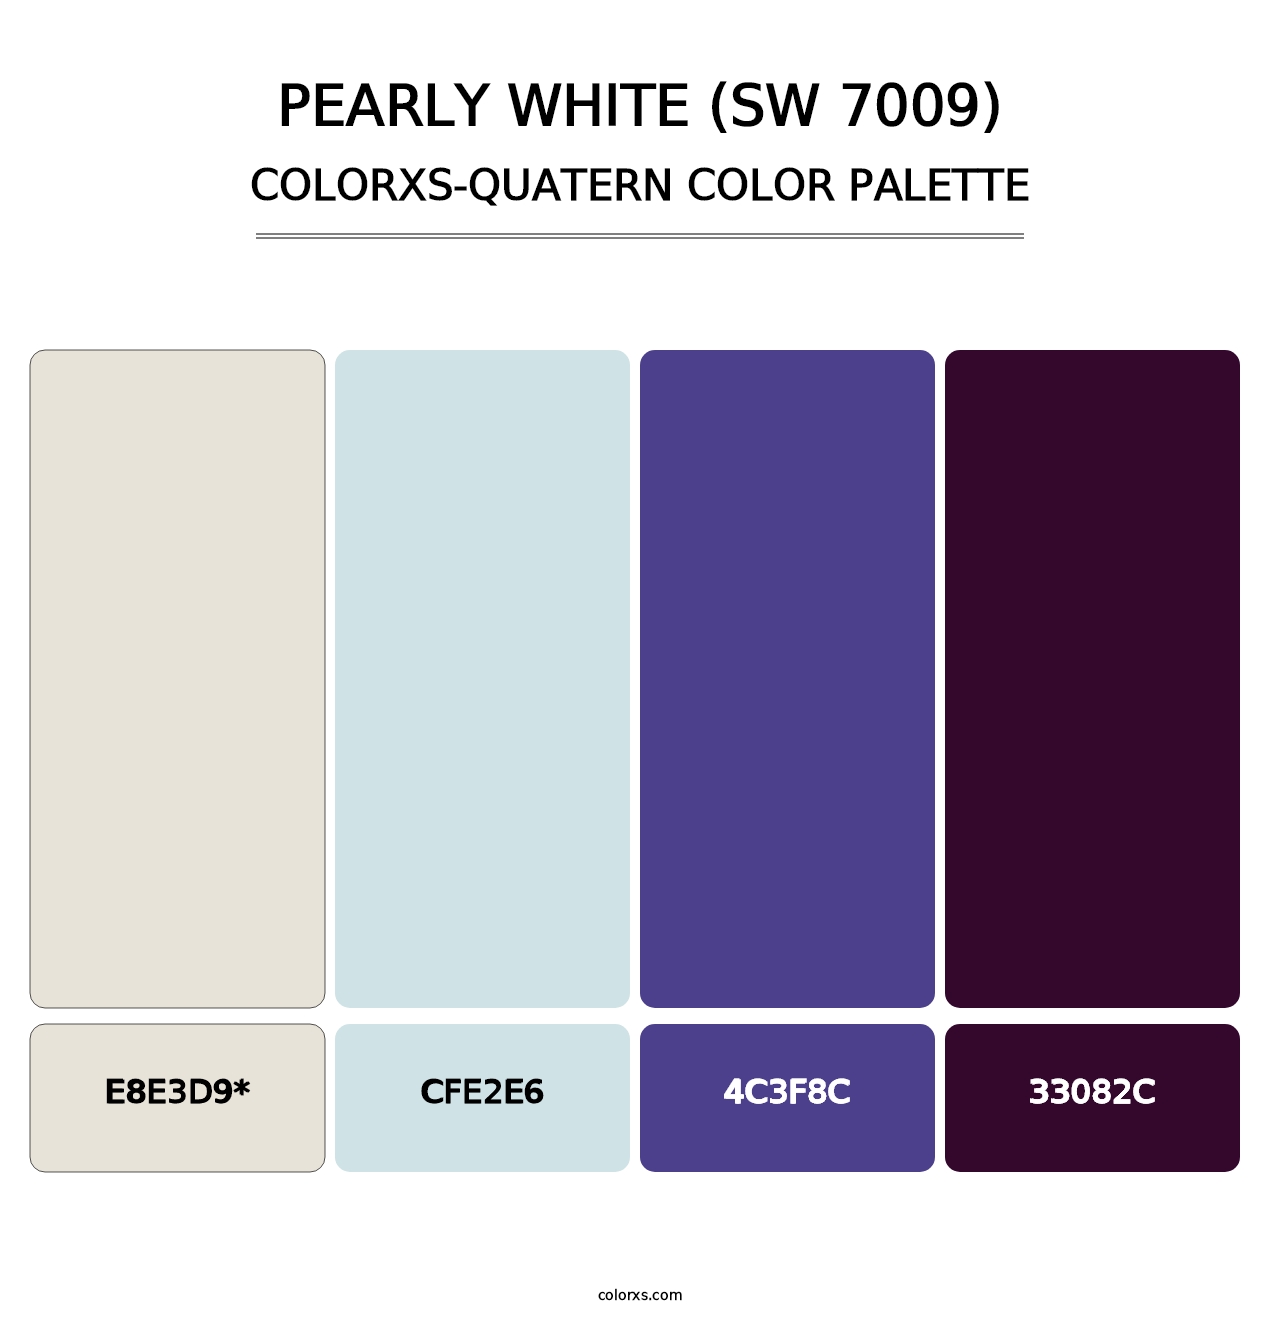 Pearly White (SW 7009) - Colorxs Quatern Palette